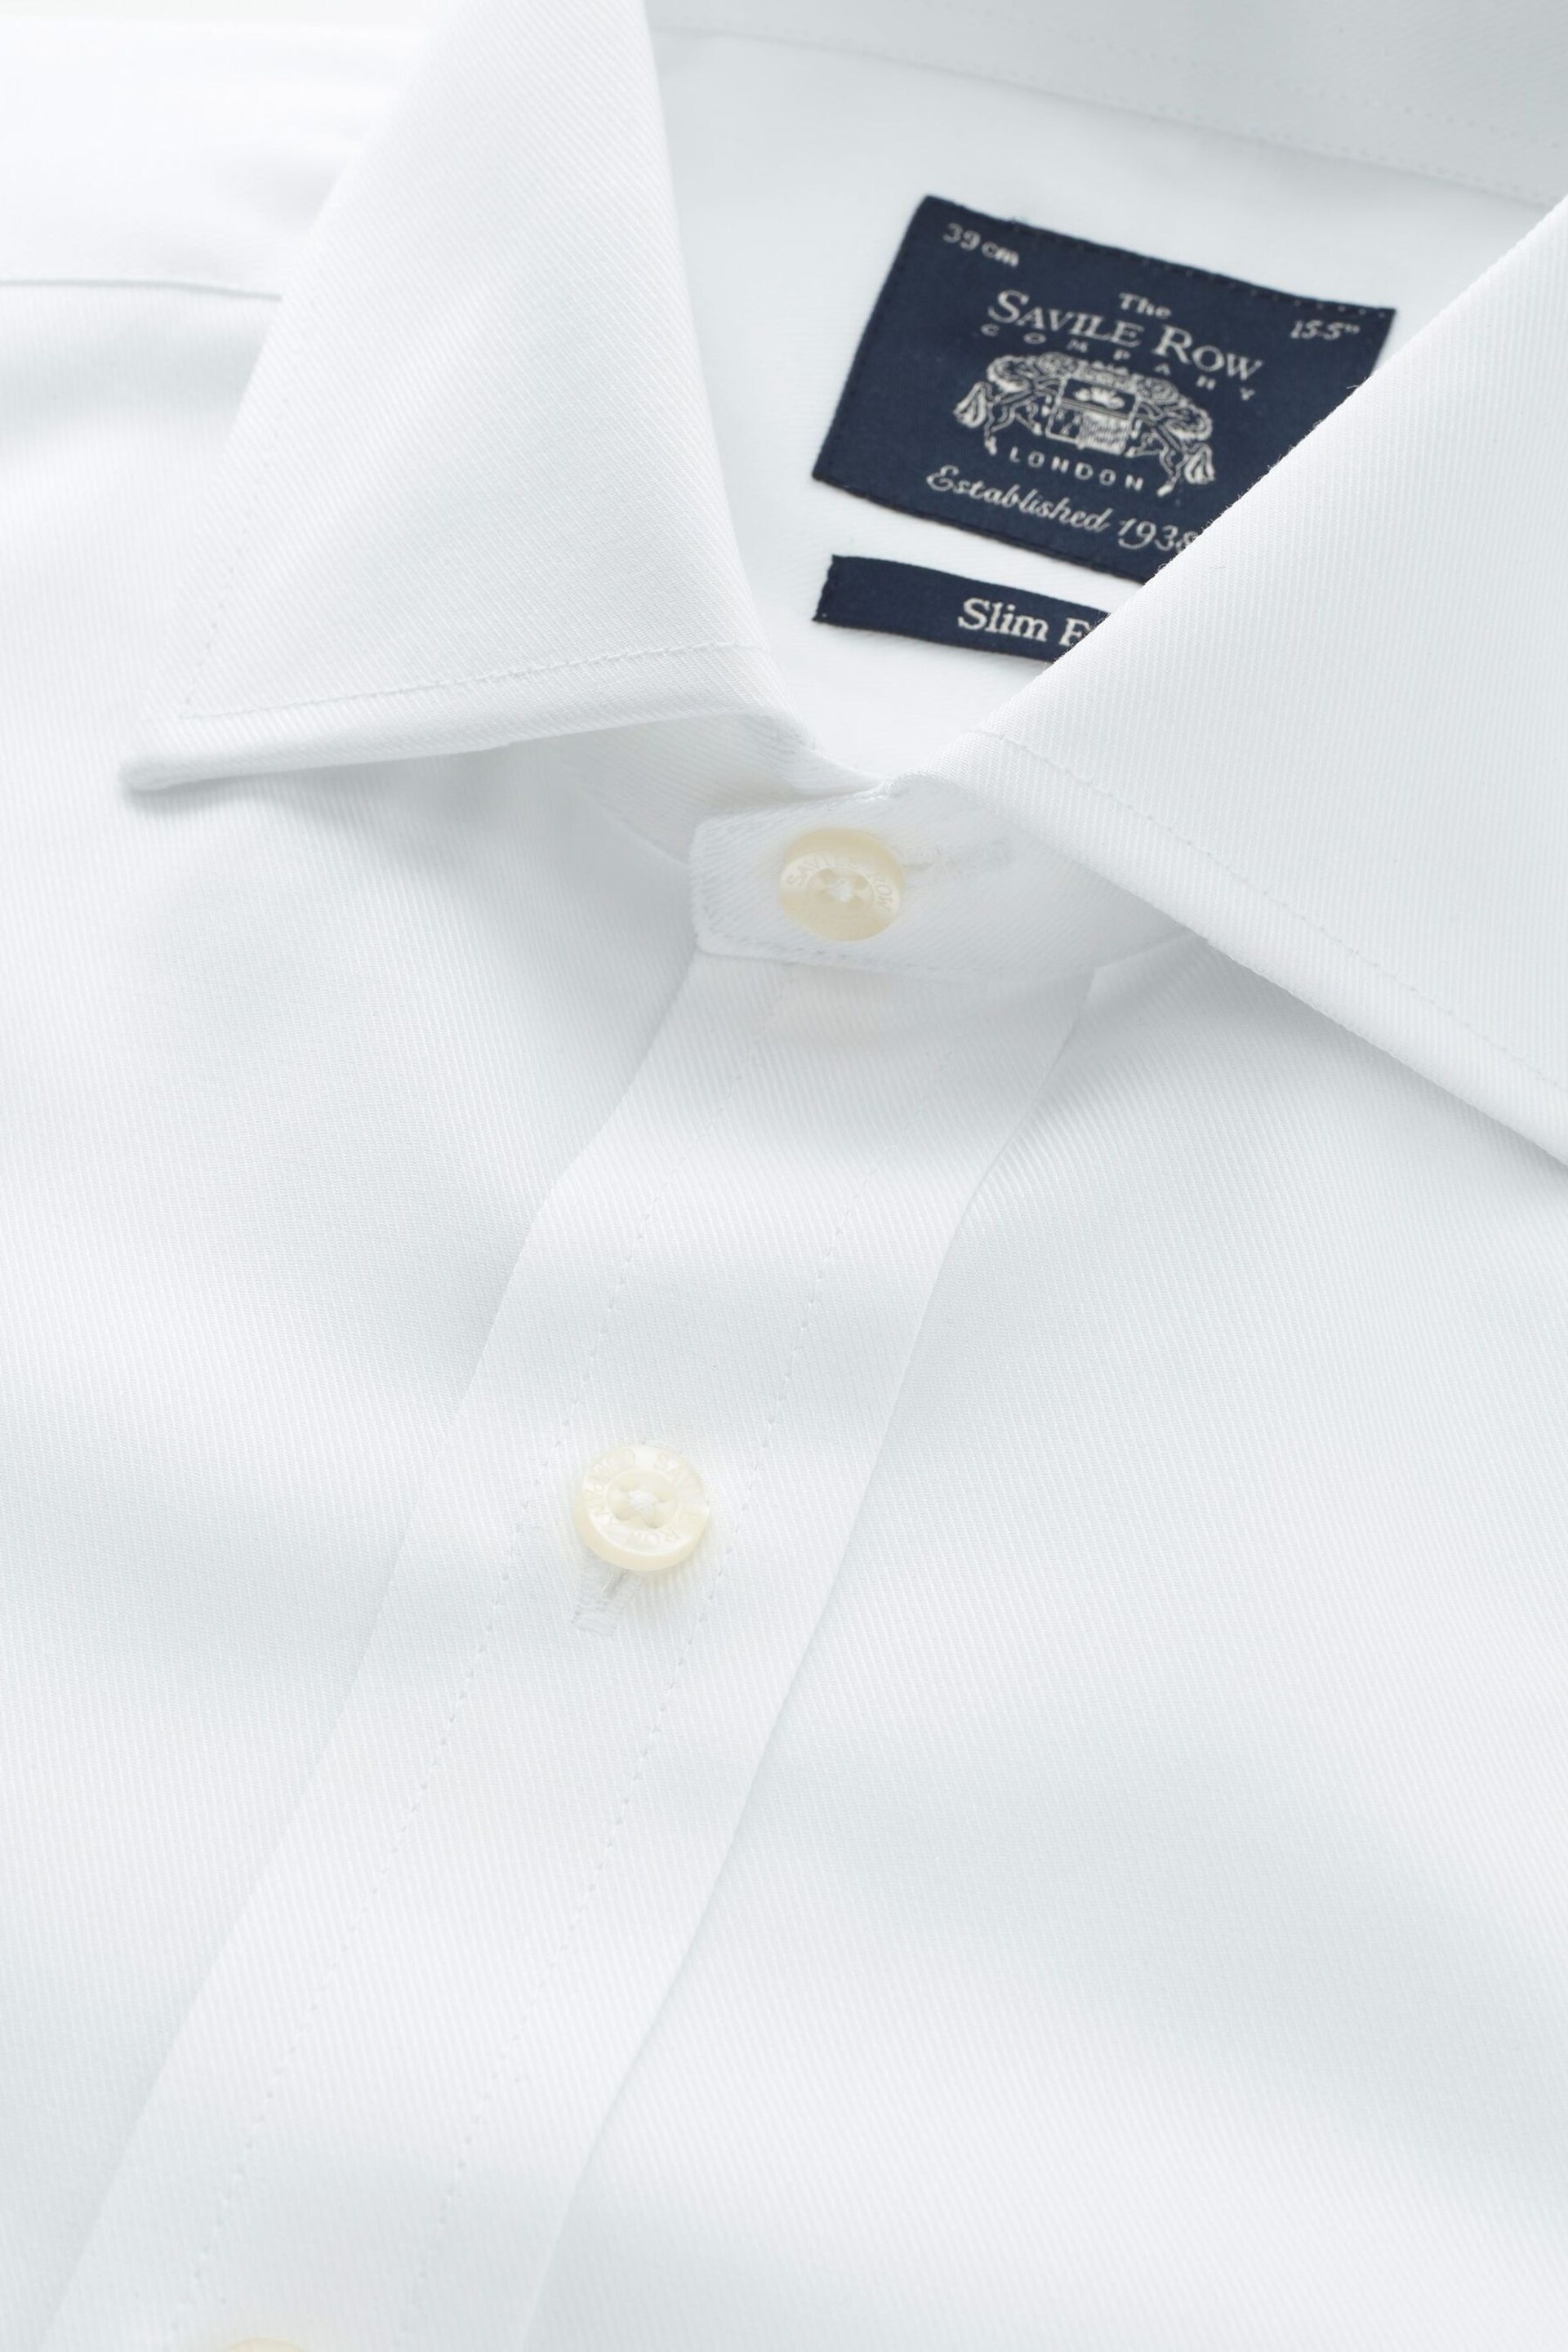 Savile Row Co White Fine Twill Slim Fit Double Cuff Shirt - Image 4 of 6